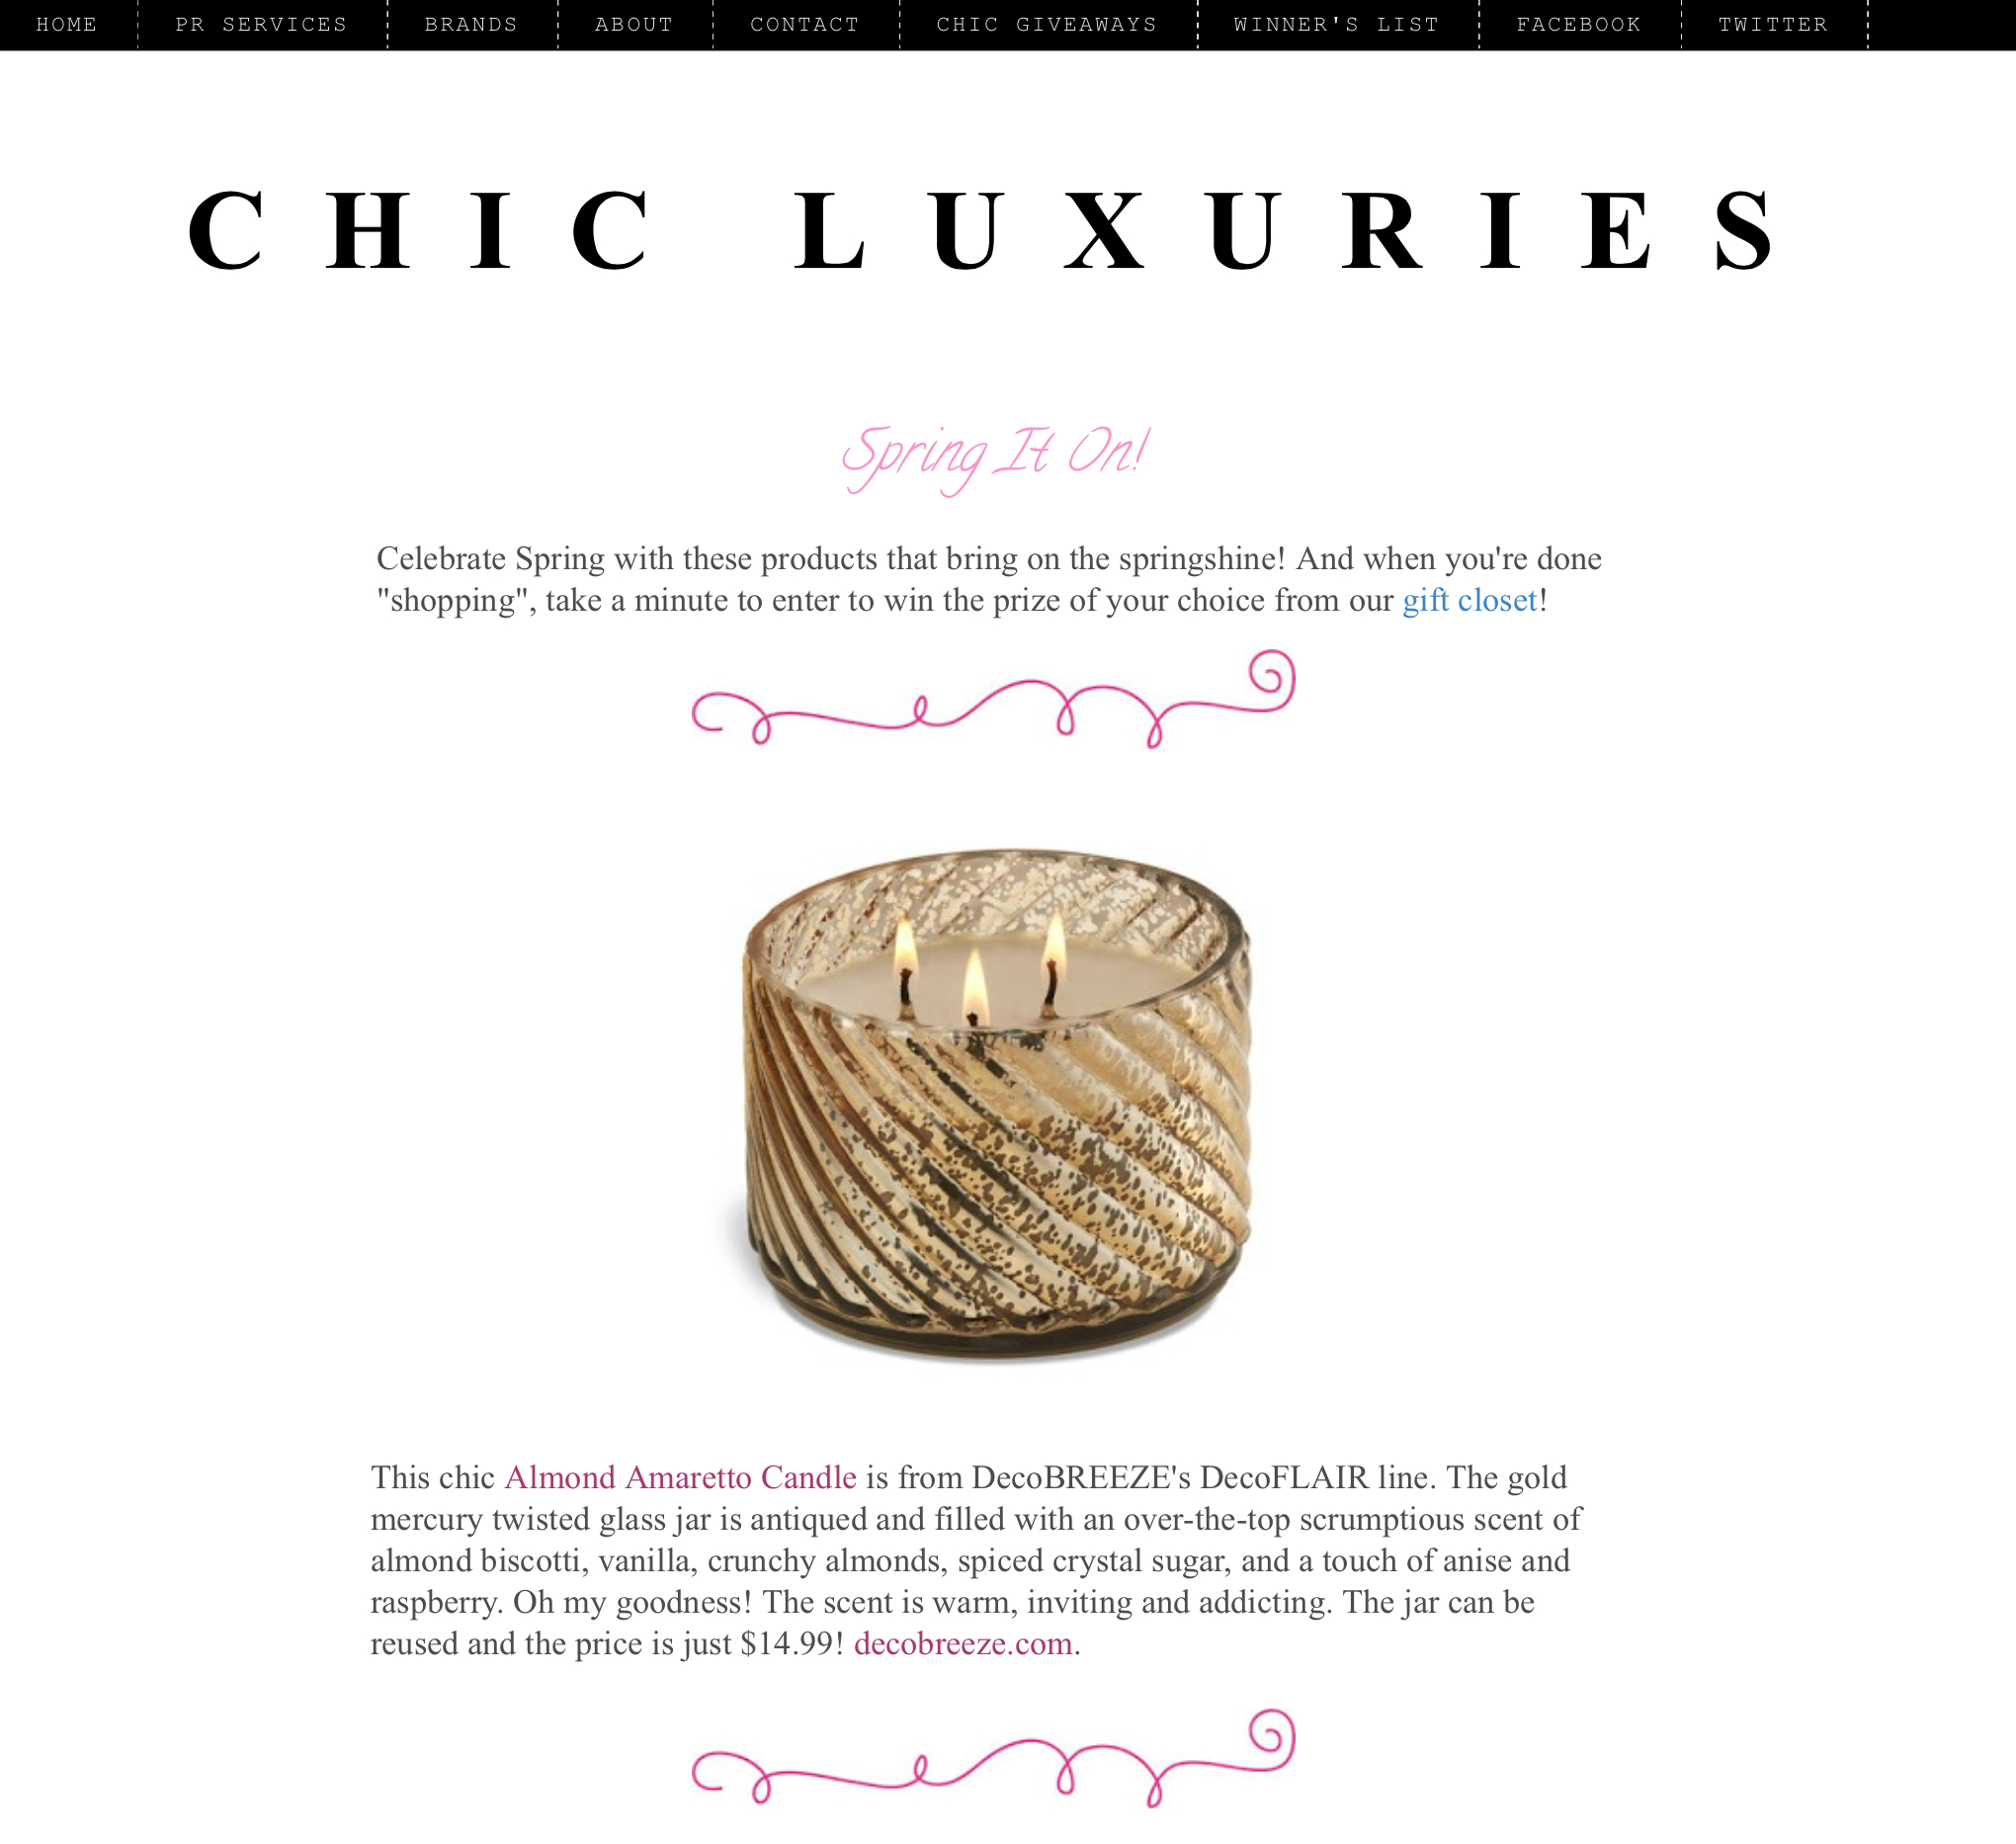 Chic Luxuries "Spring it On"